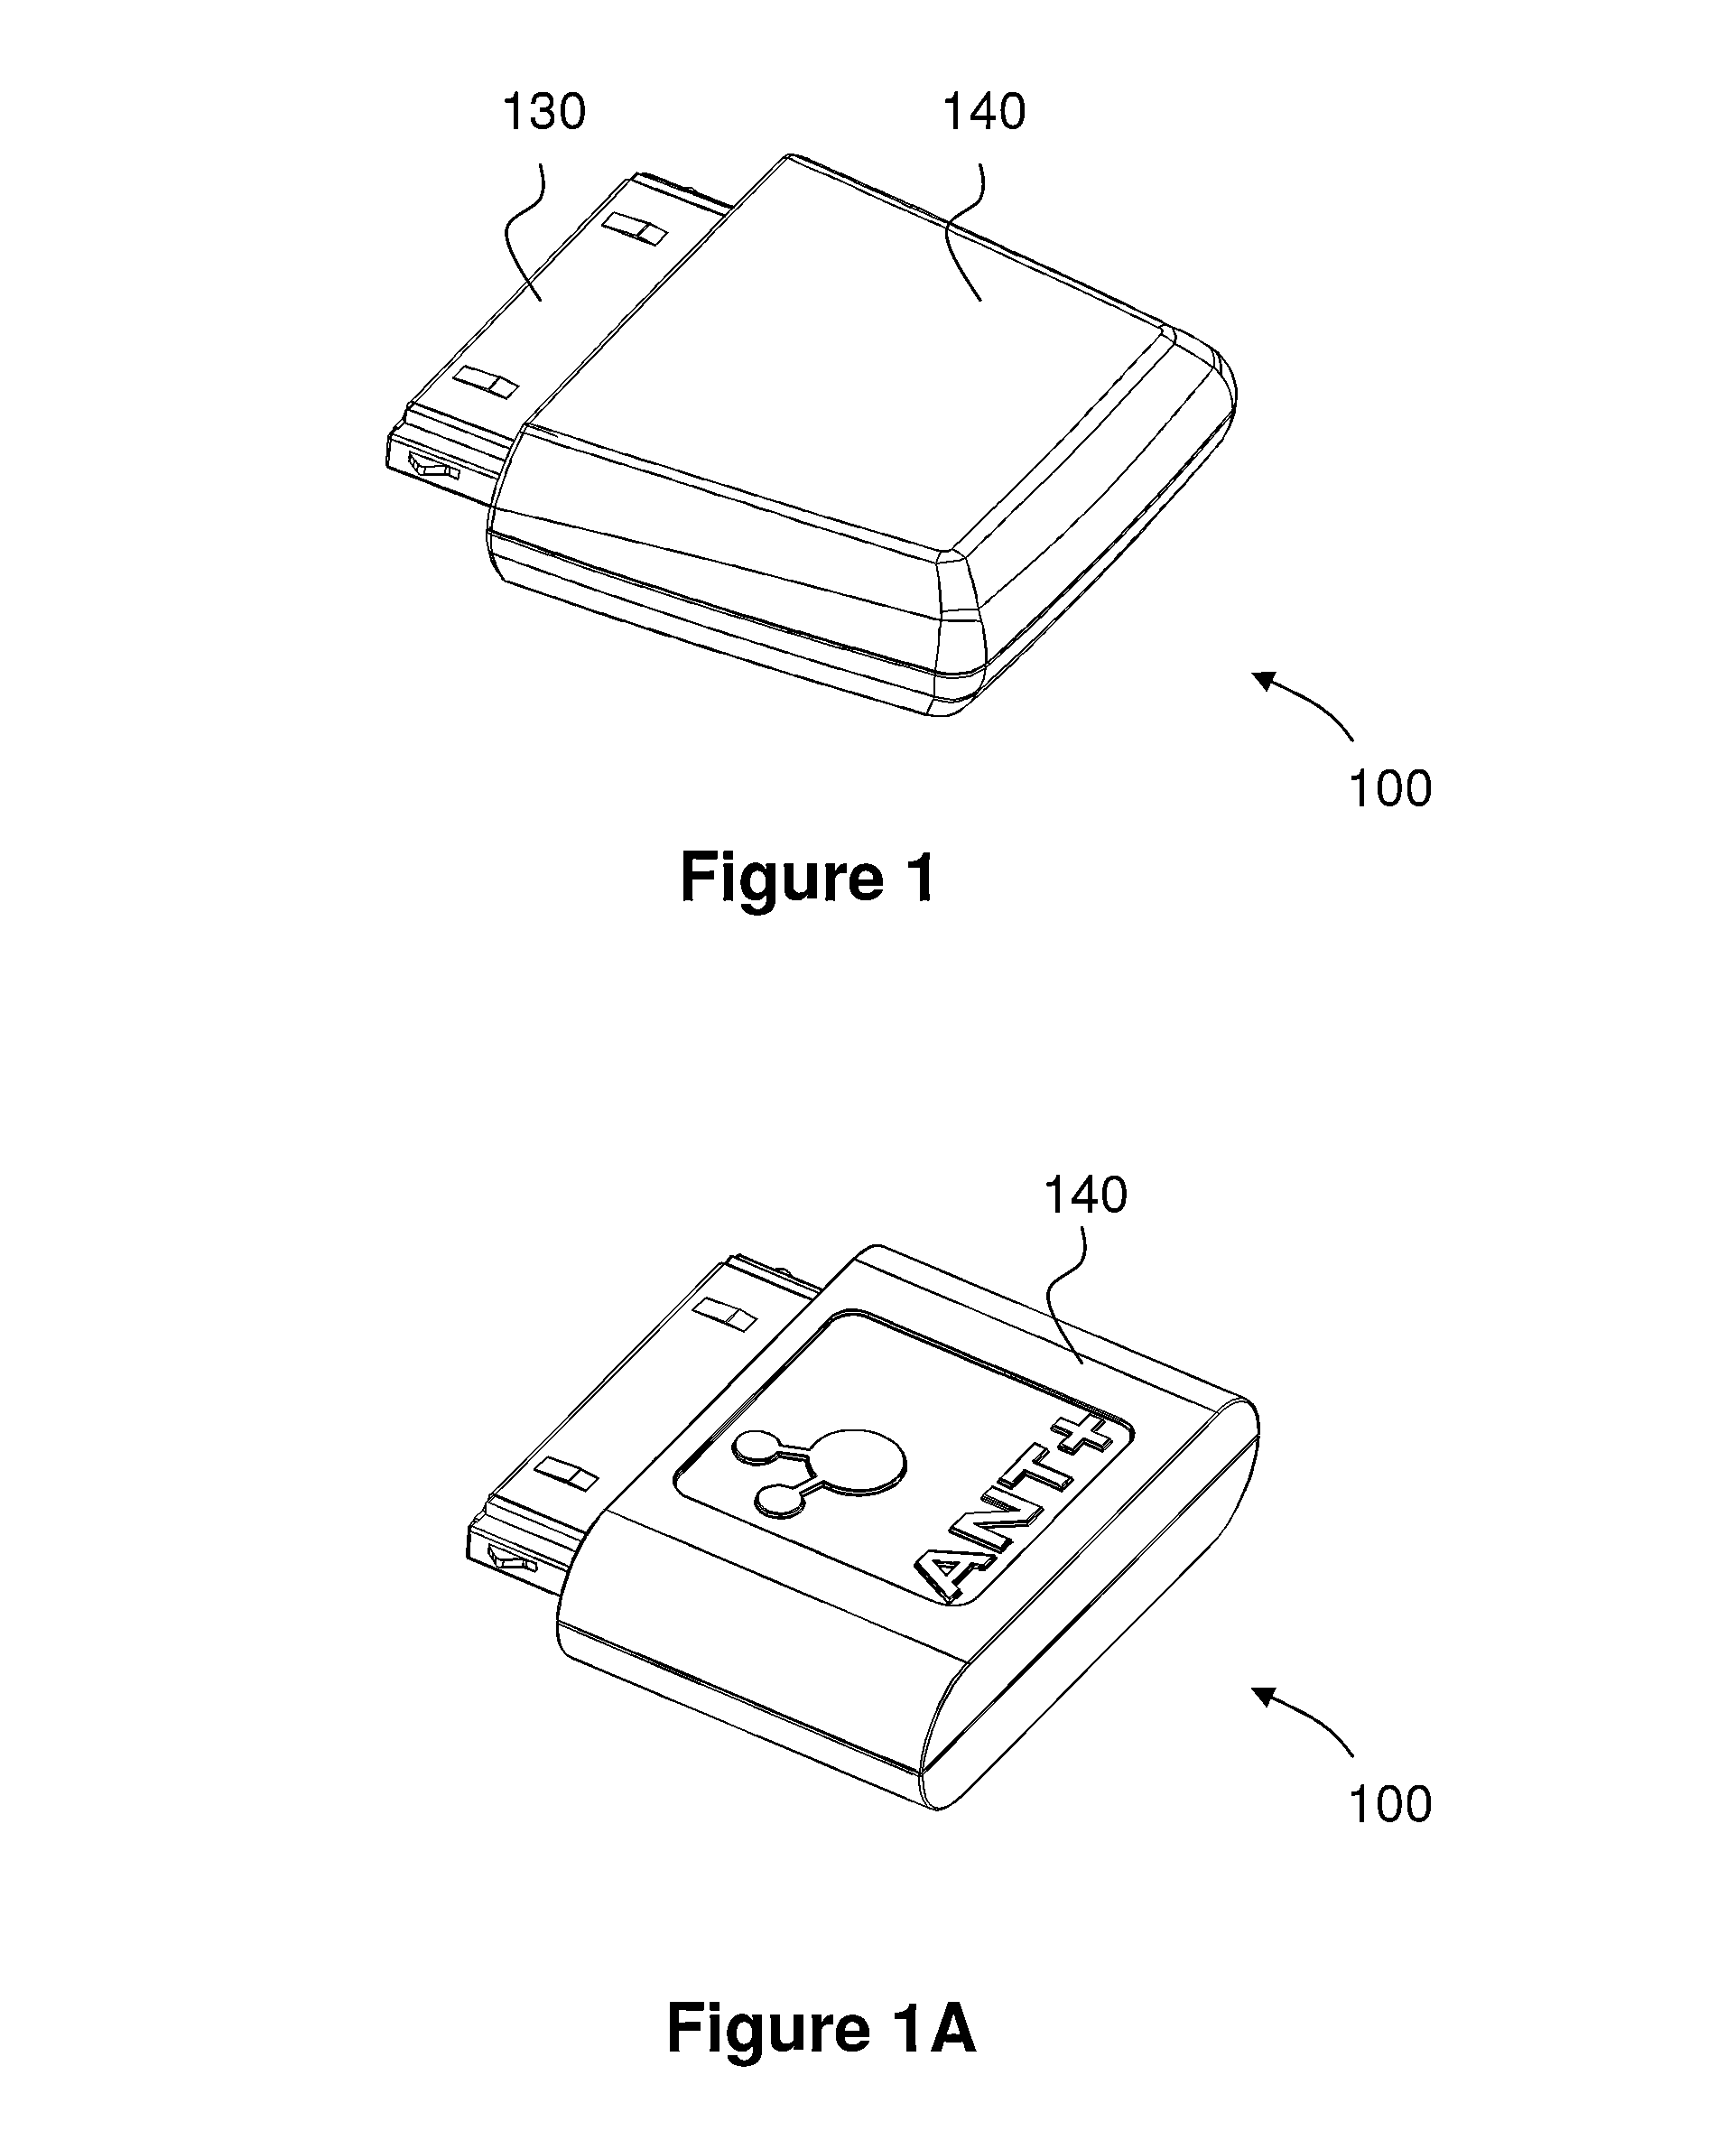 Performance monitoring apparatus and casing therefor